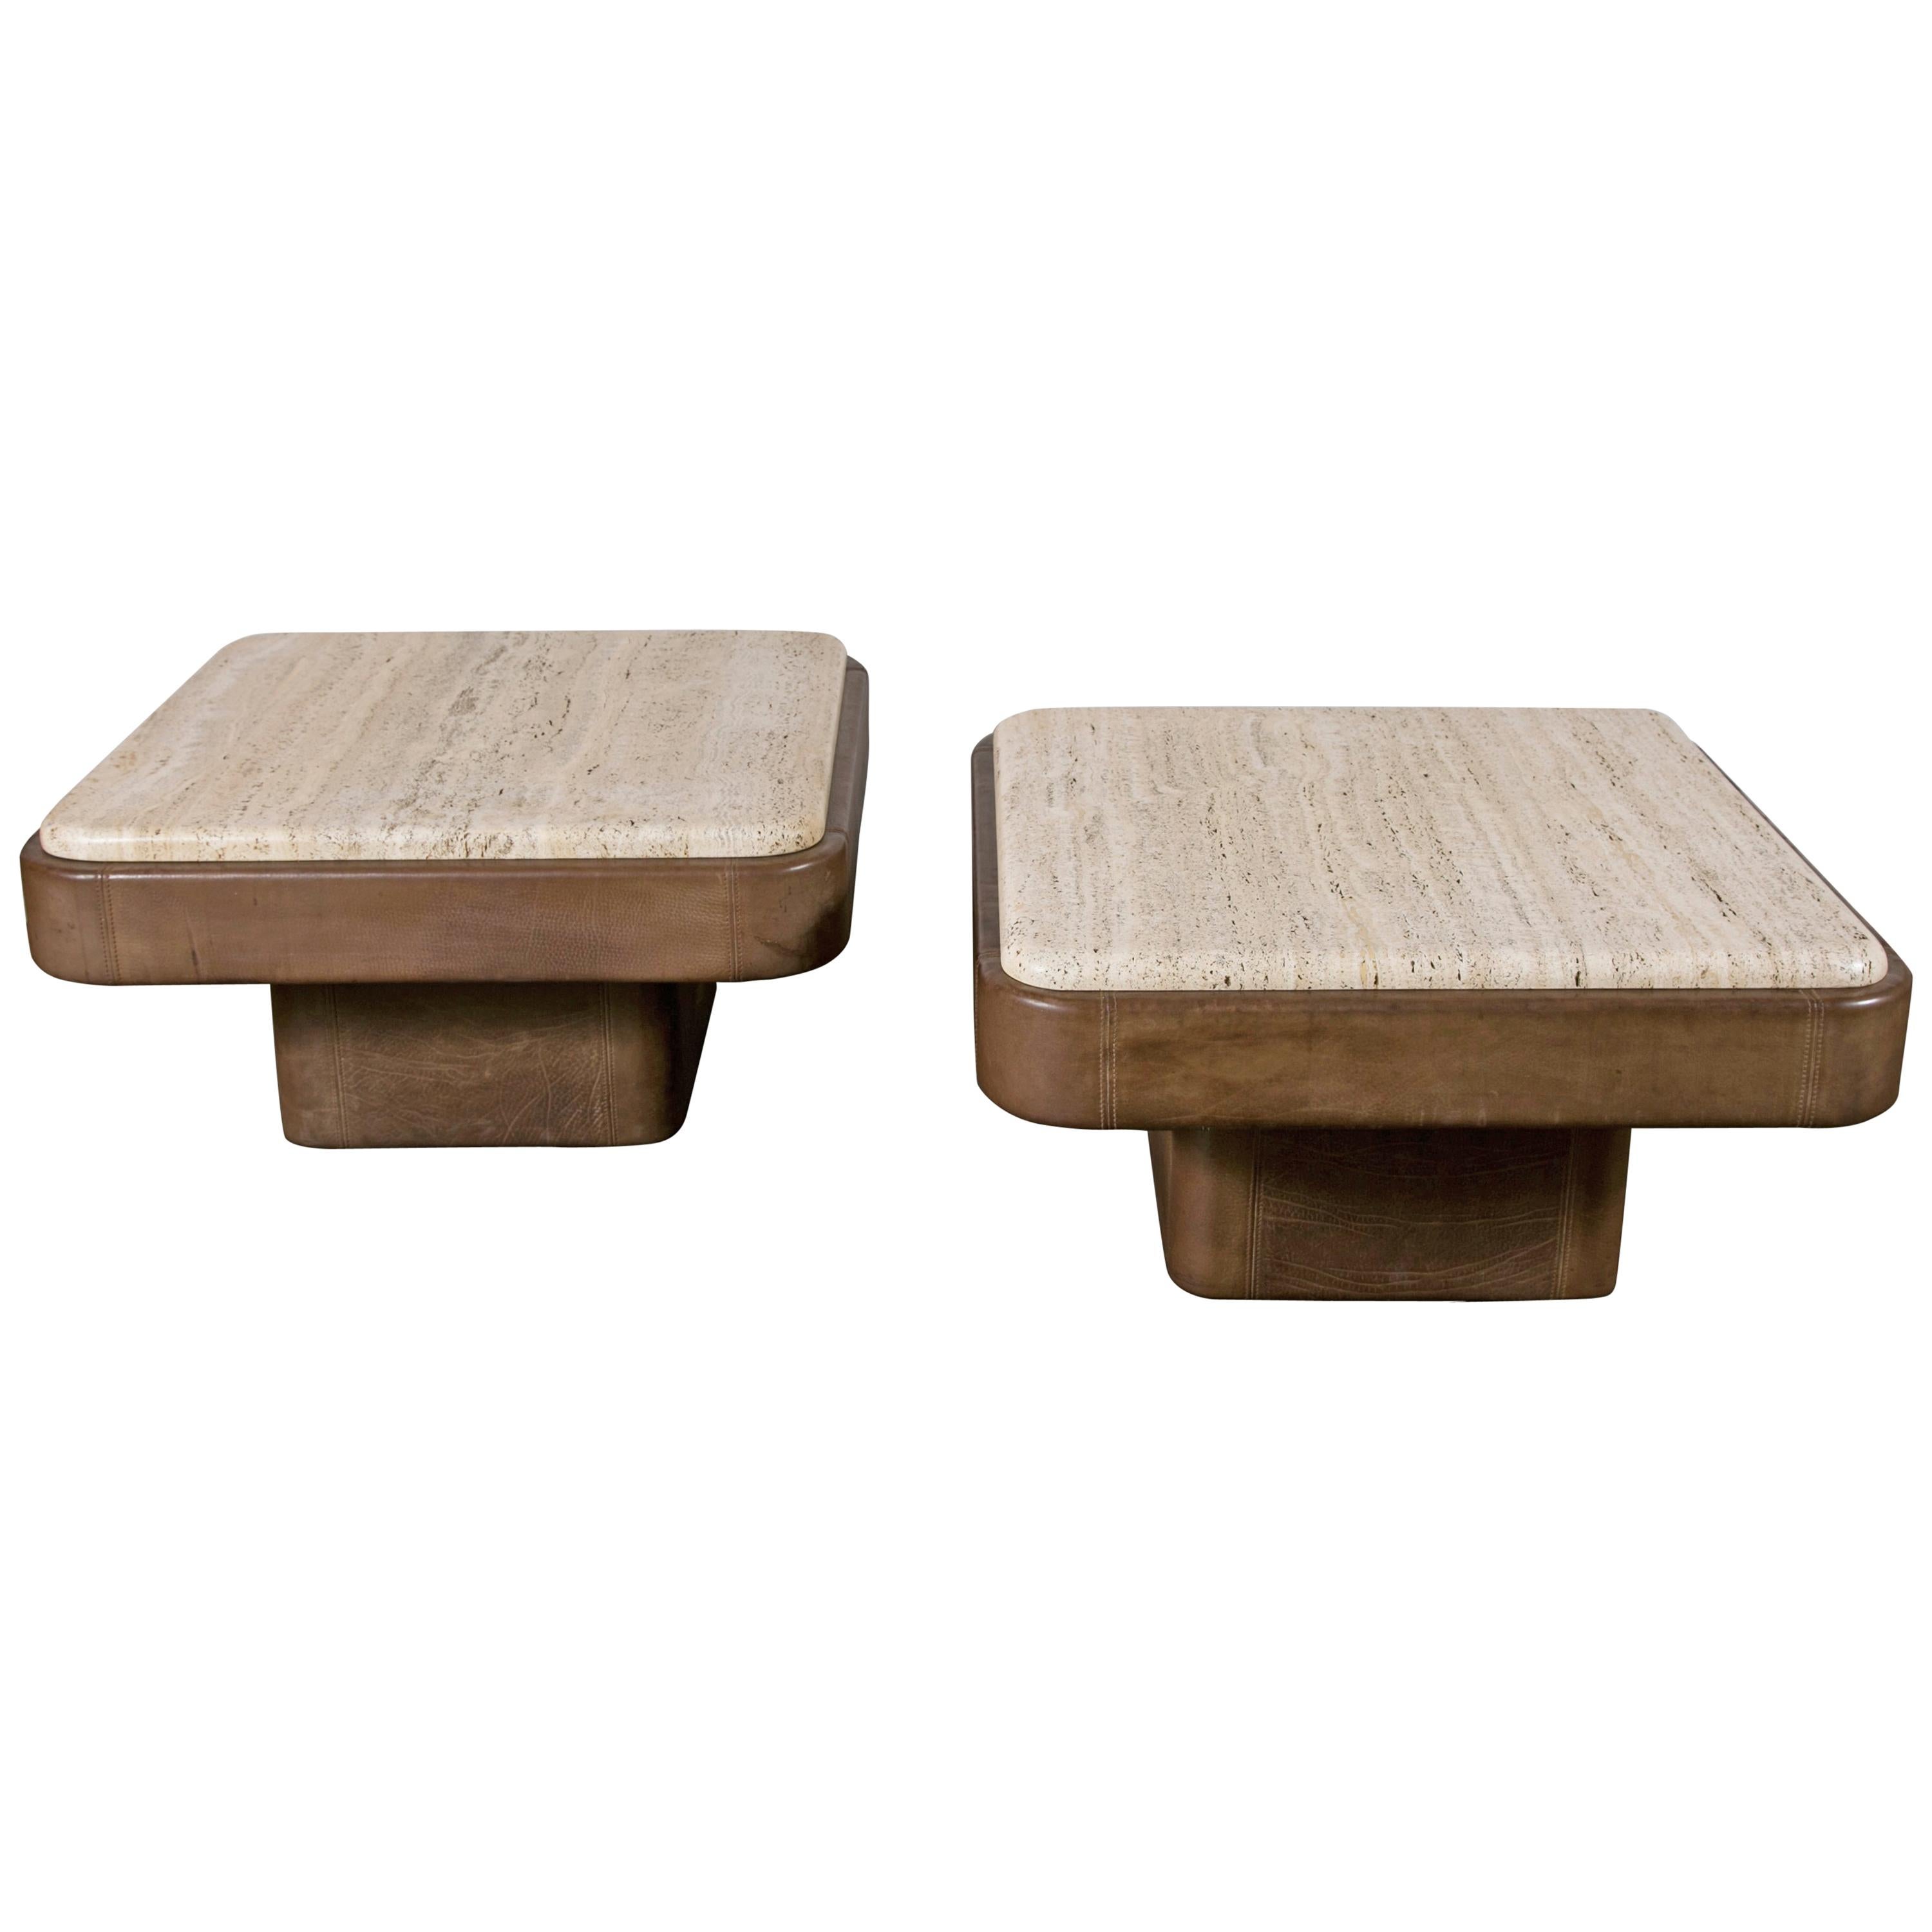 Pair of De Sede Leather End Tables with Travertine Top